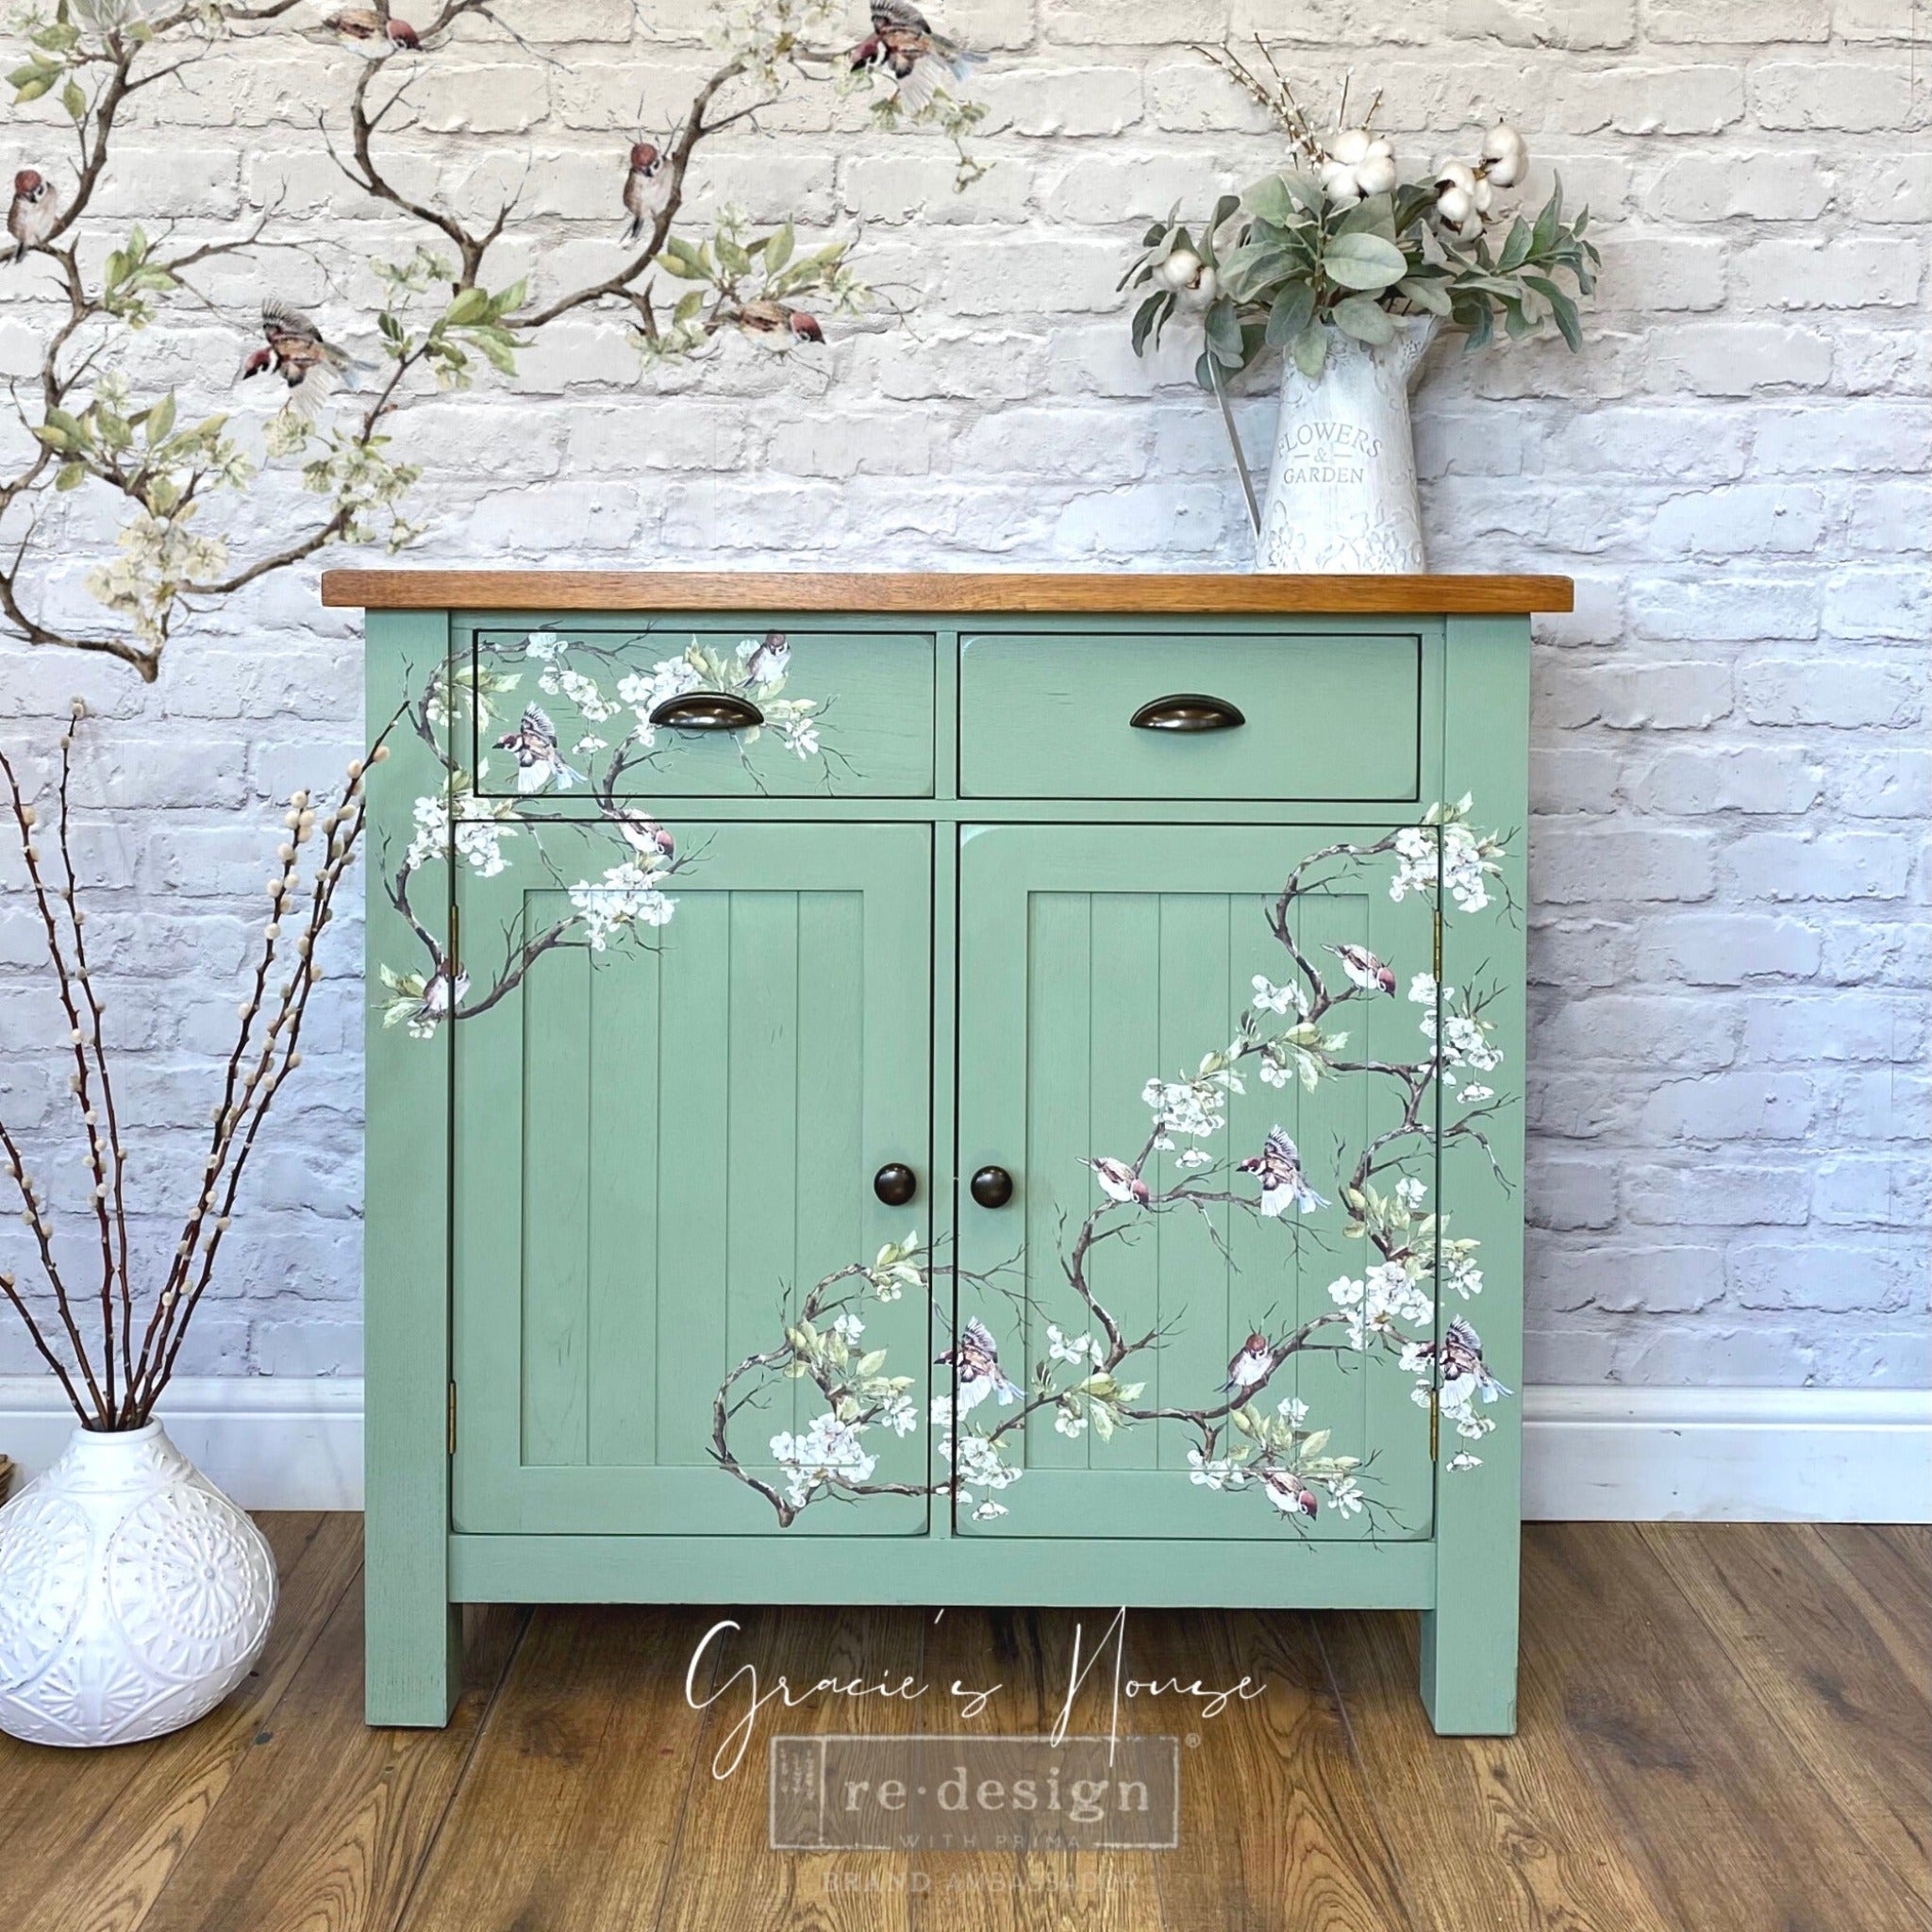 A small buffet table refurbished by Gracie's House is painted mint green and features ReDesign with Prima's Blossom Flight transfer on it.